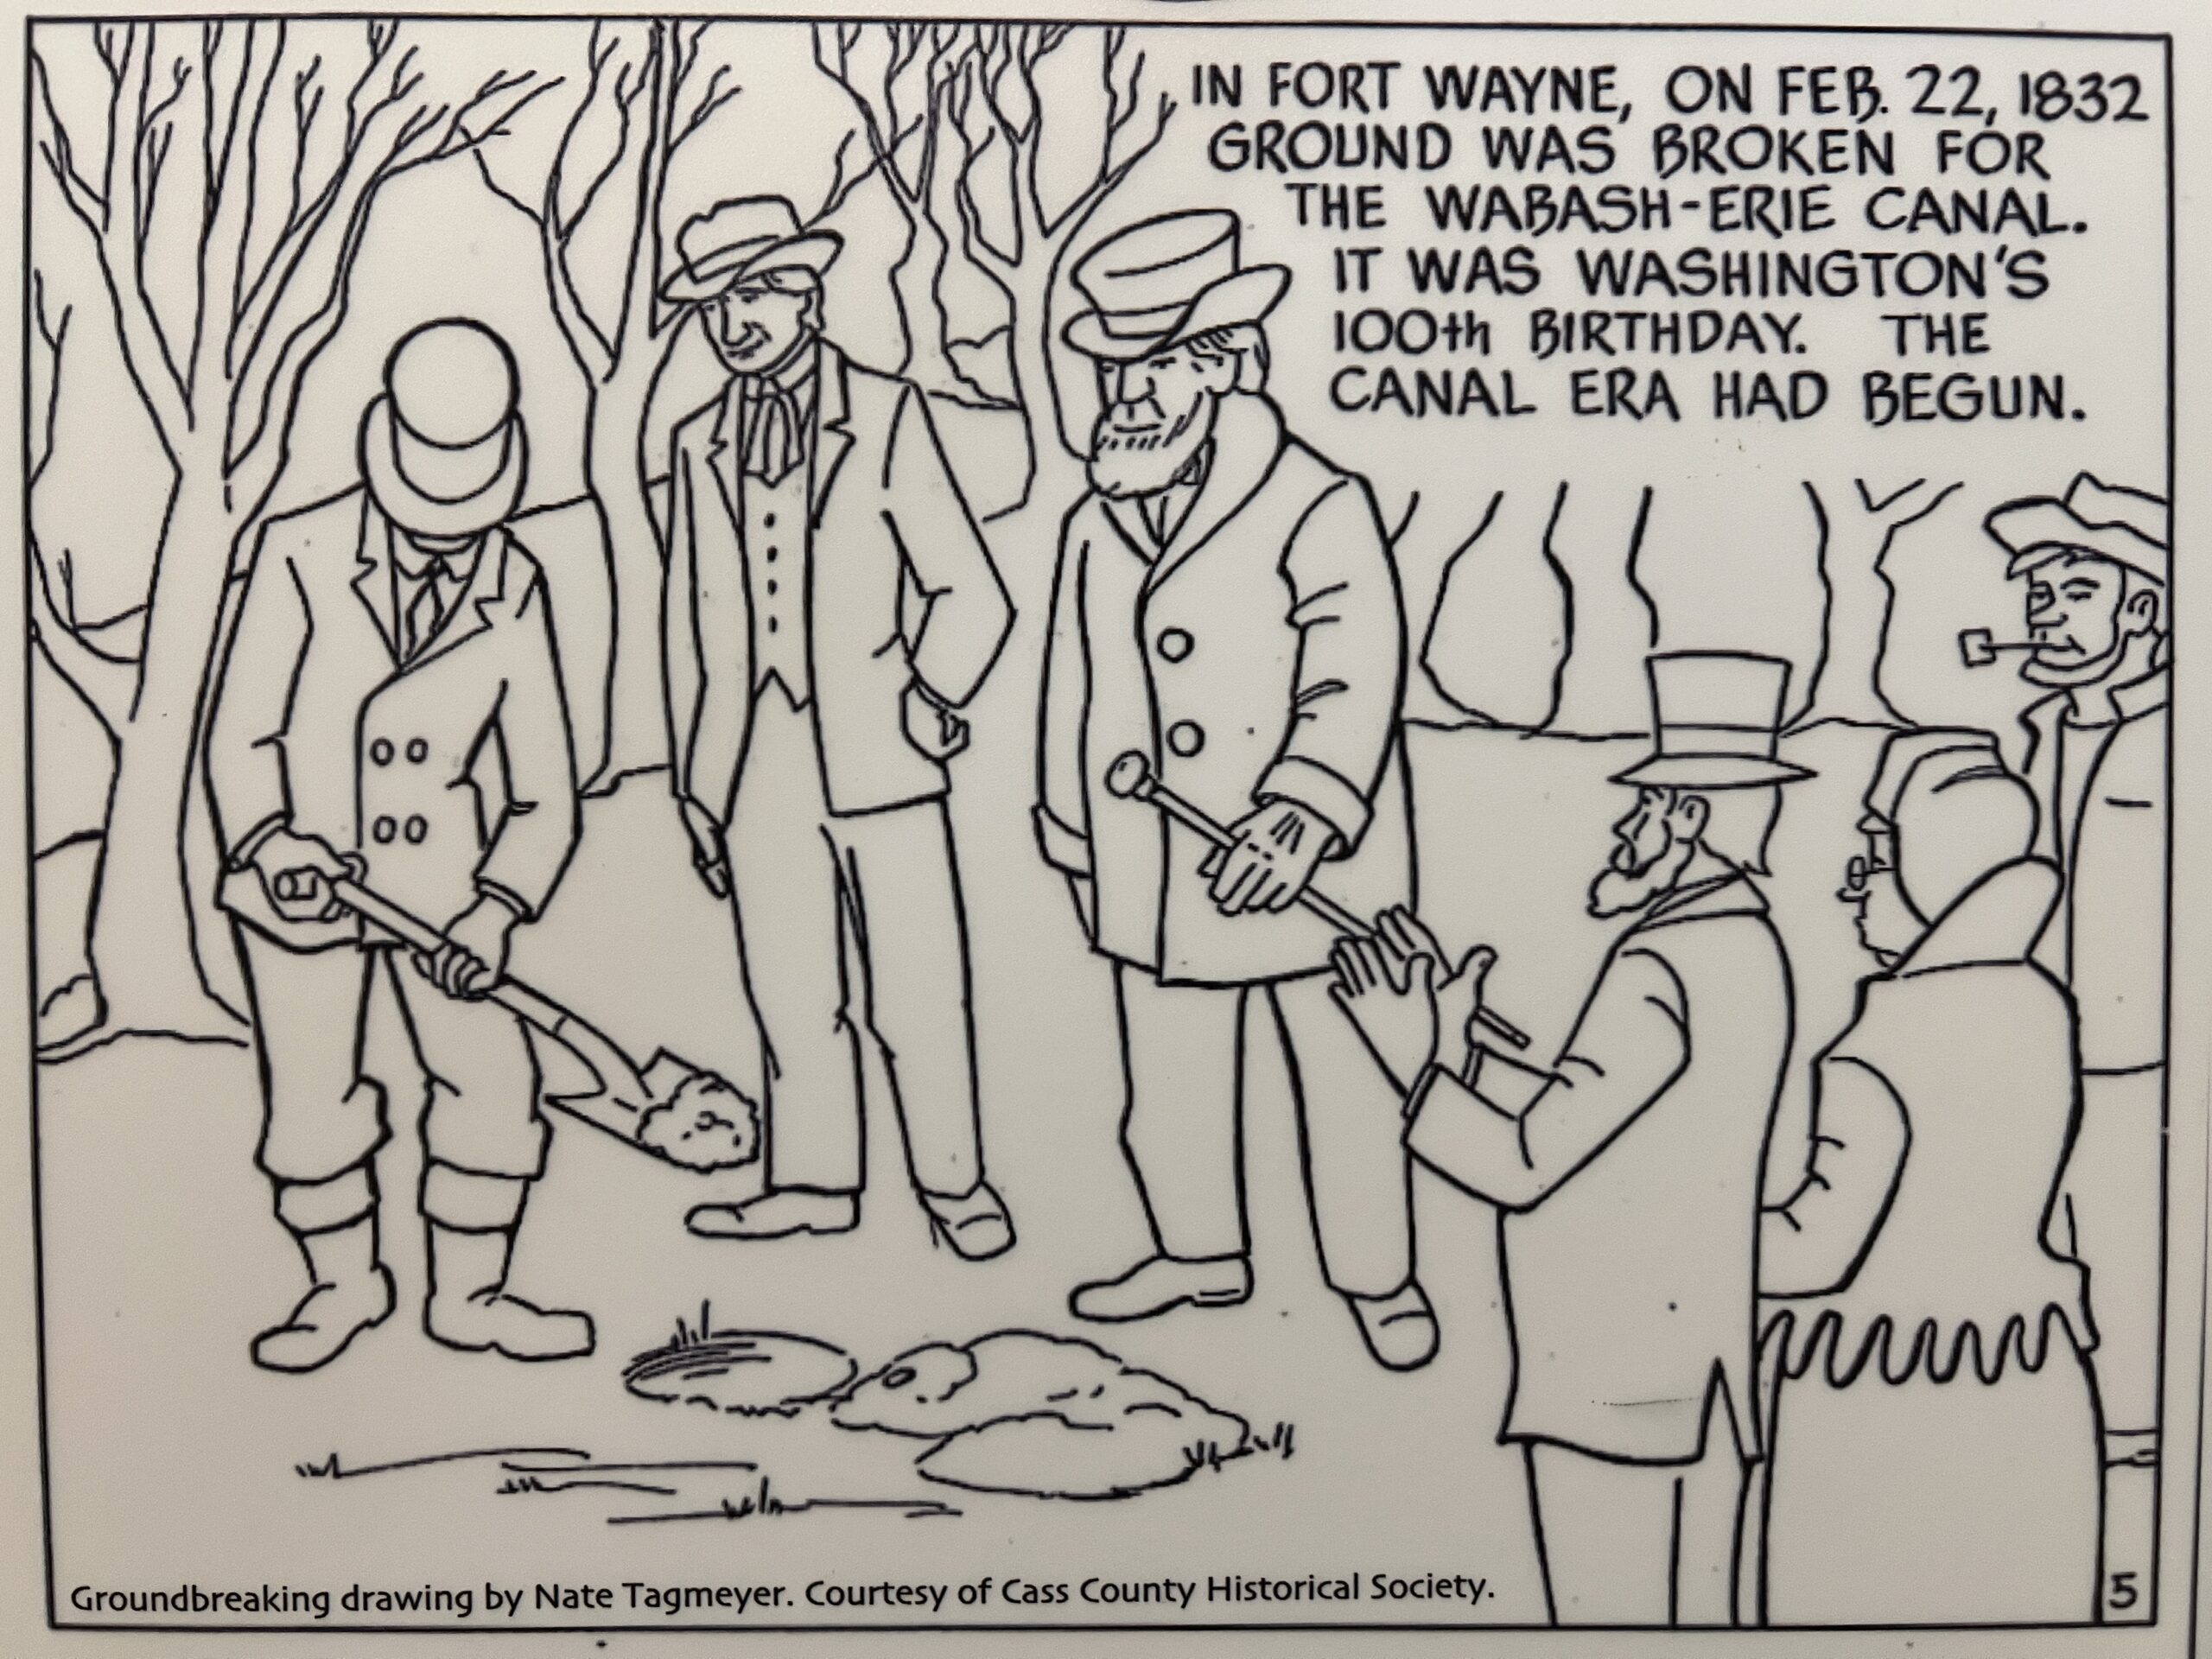 A cartoon depicting the Wabash & Erie Canal's groundbreaking in 1832. The caption reads: In Fort Wayne, on Feb. 22, 1832, ground was broken for the Wabash-Erie Canal. It was Washington's 100th birthday. The Canal Era had begun.